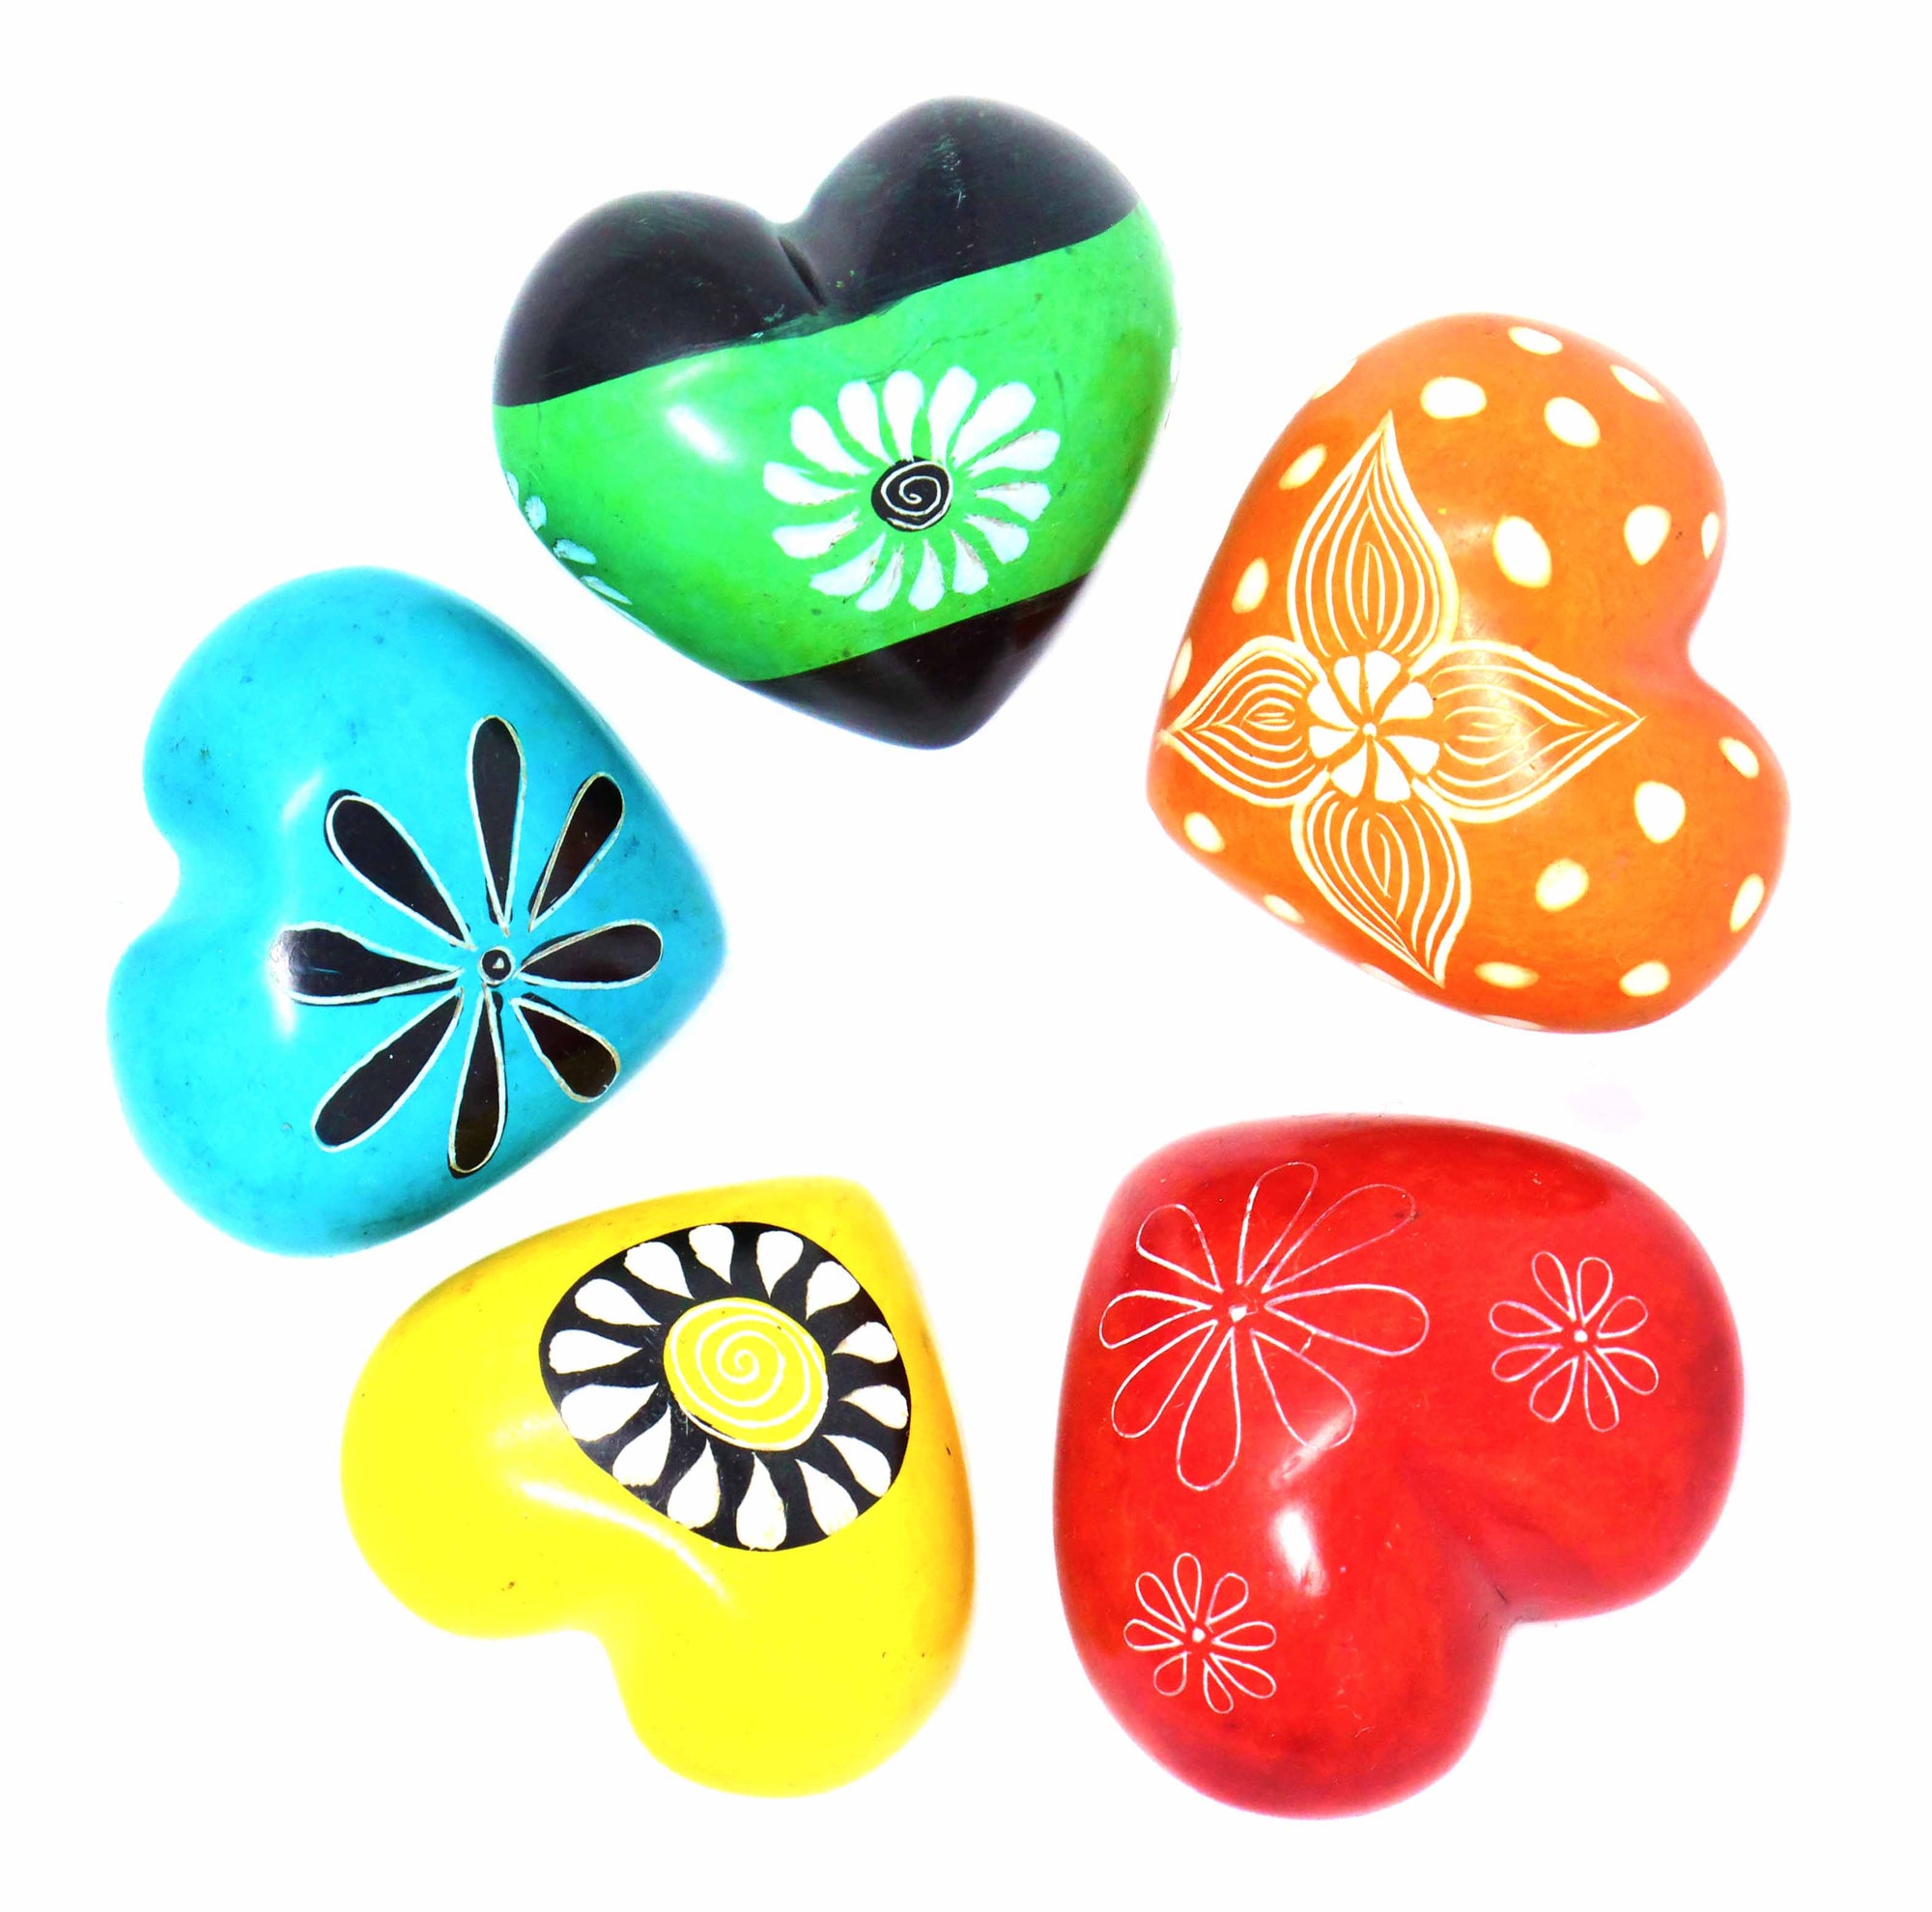 Colorful Soapstone Hearts in Assorted Colors with Designs, Set of 10